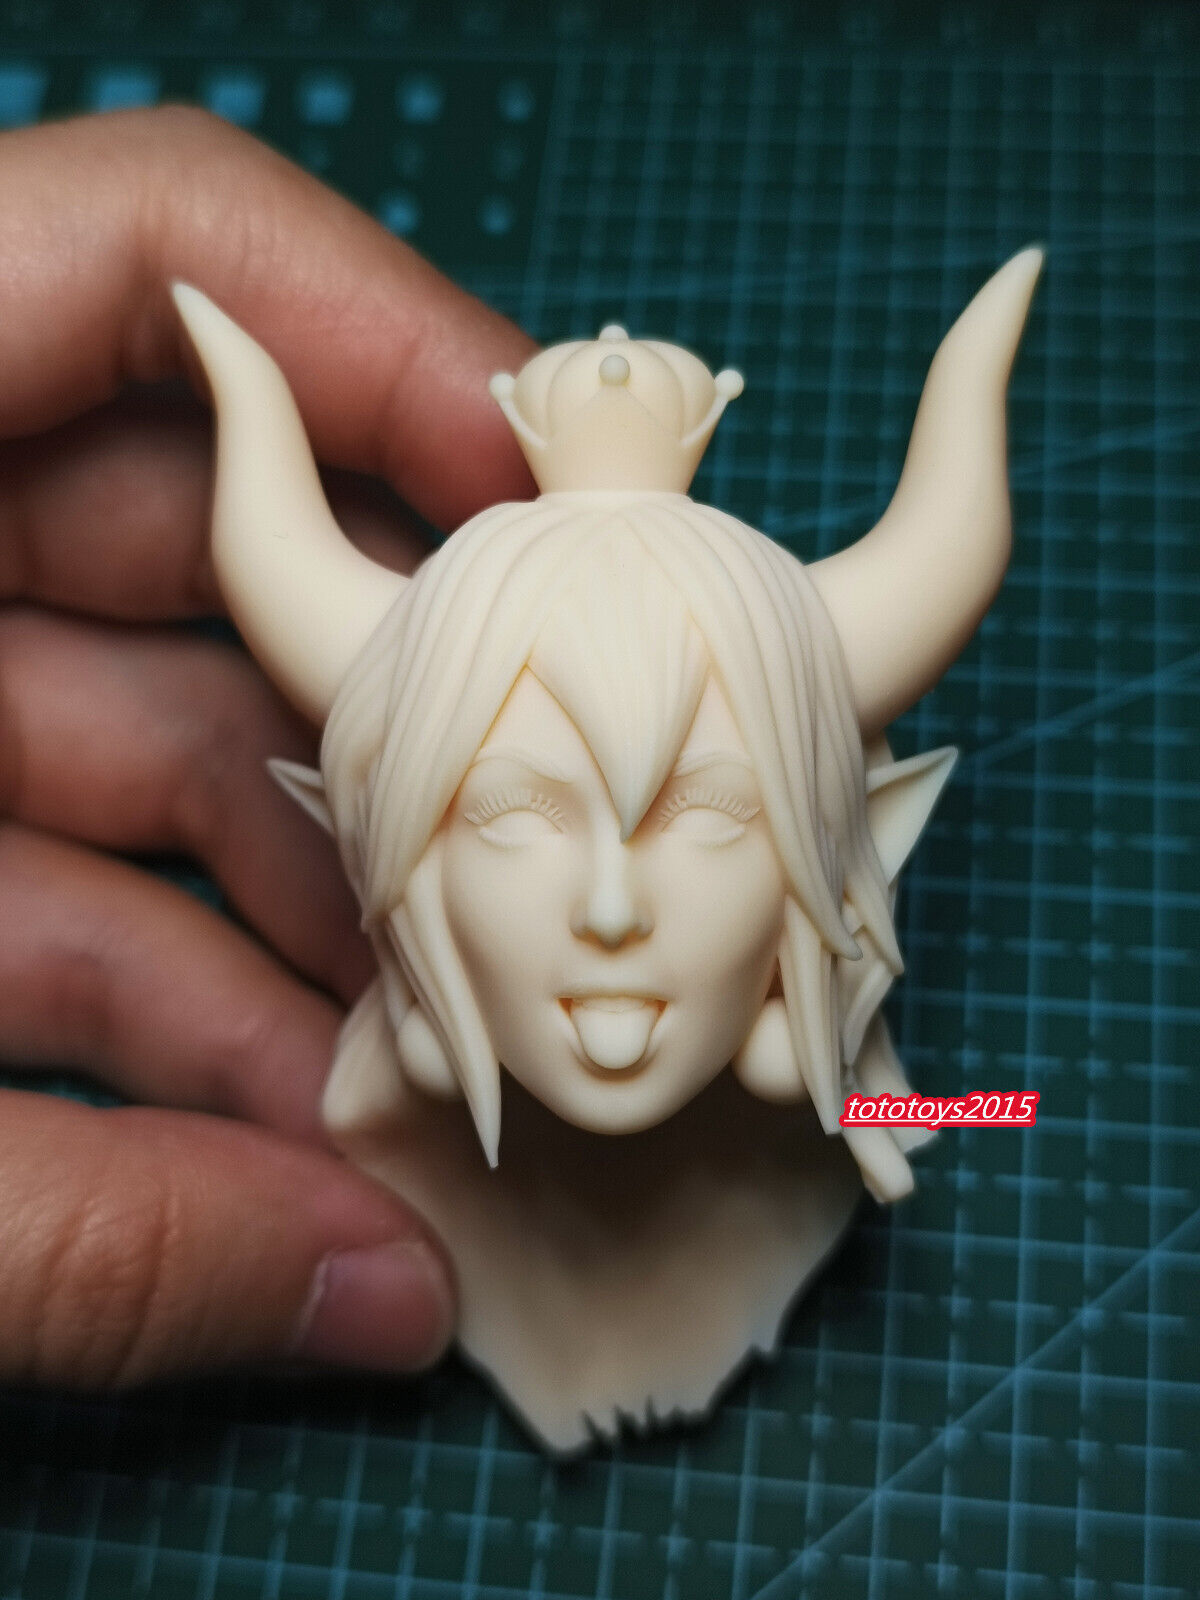 Awesome 1:6 1:12 1:18 Anime Girl Tongue Out Head Sculpt Carved For 12” Male Figure Body on eBay